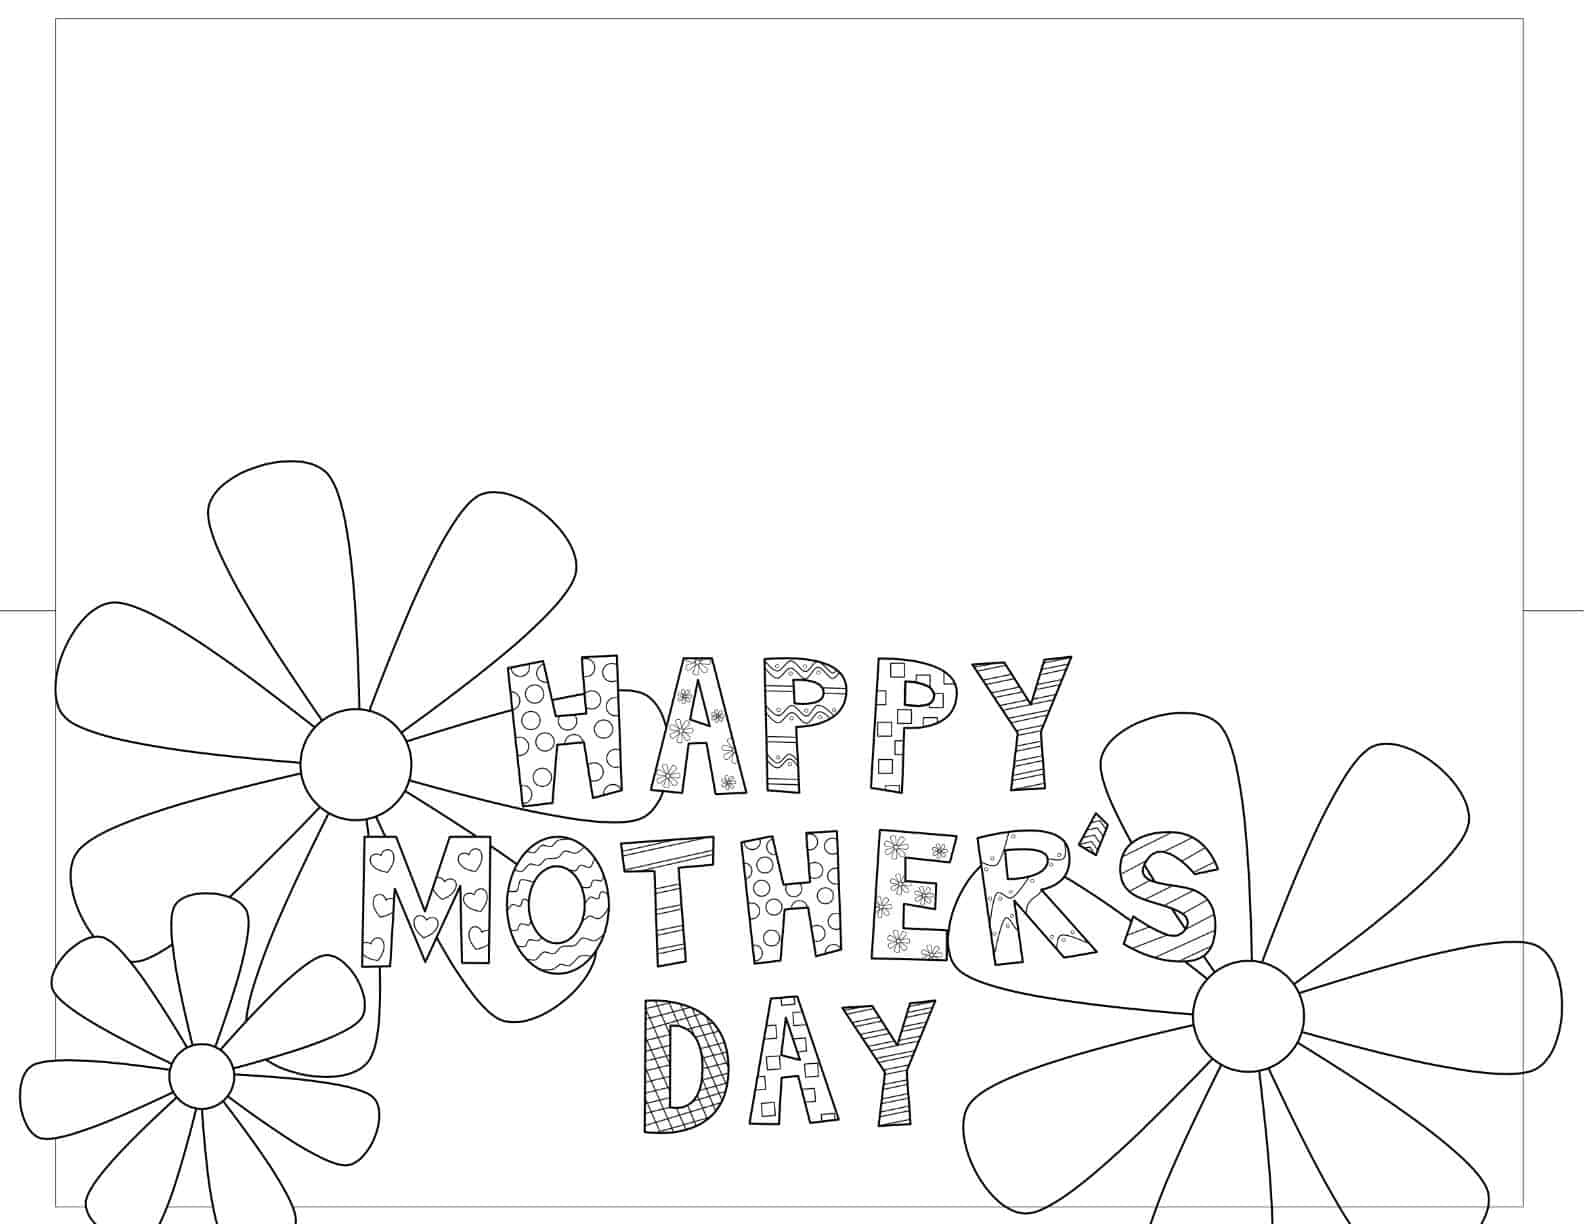 happy-mothers-day-card-black-and-white-1-the-art-mad